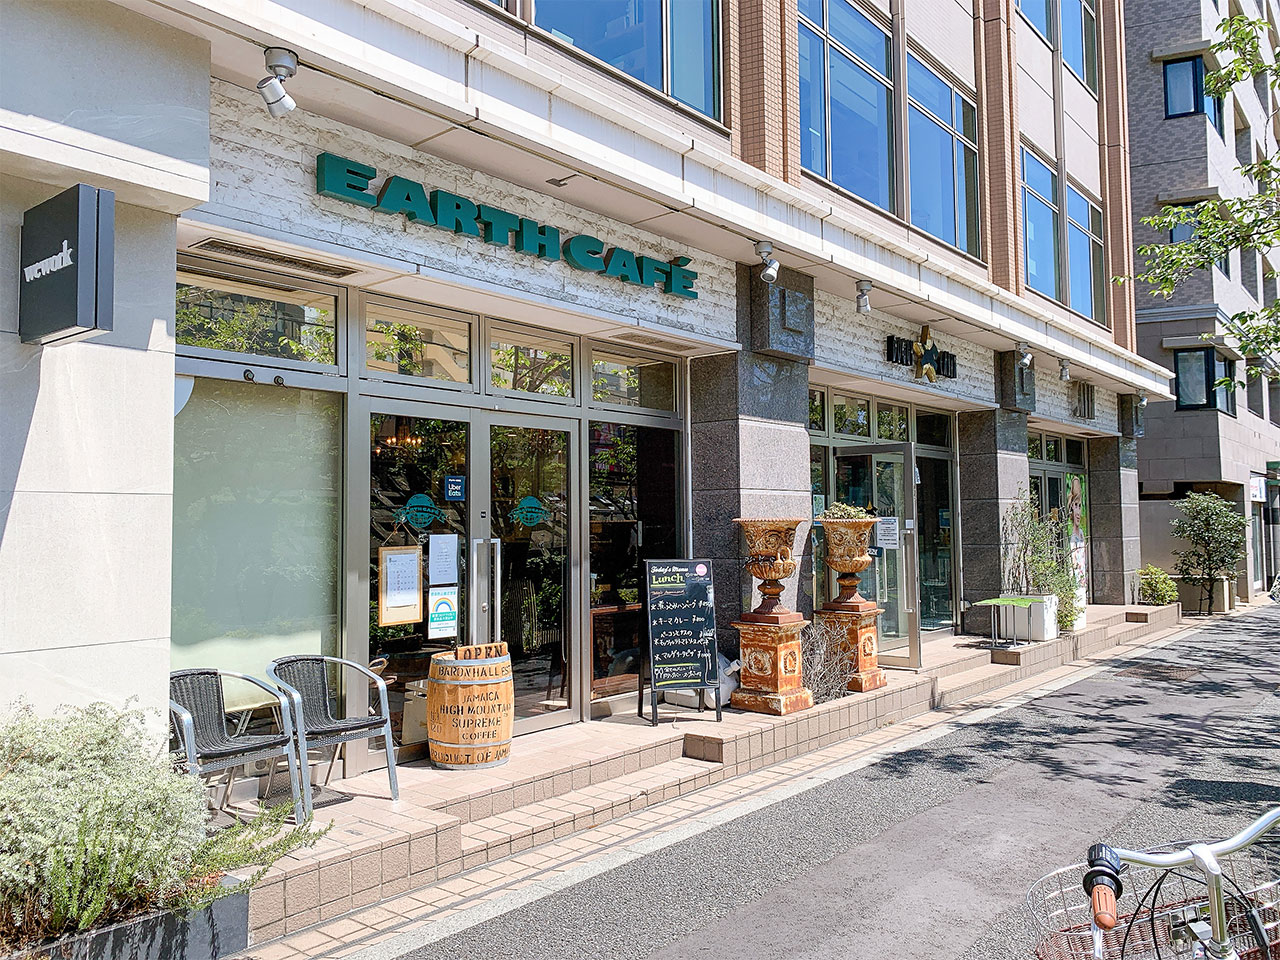 EARTH CAFE (アース カフェ)